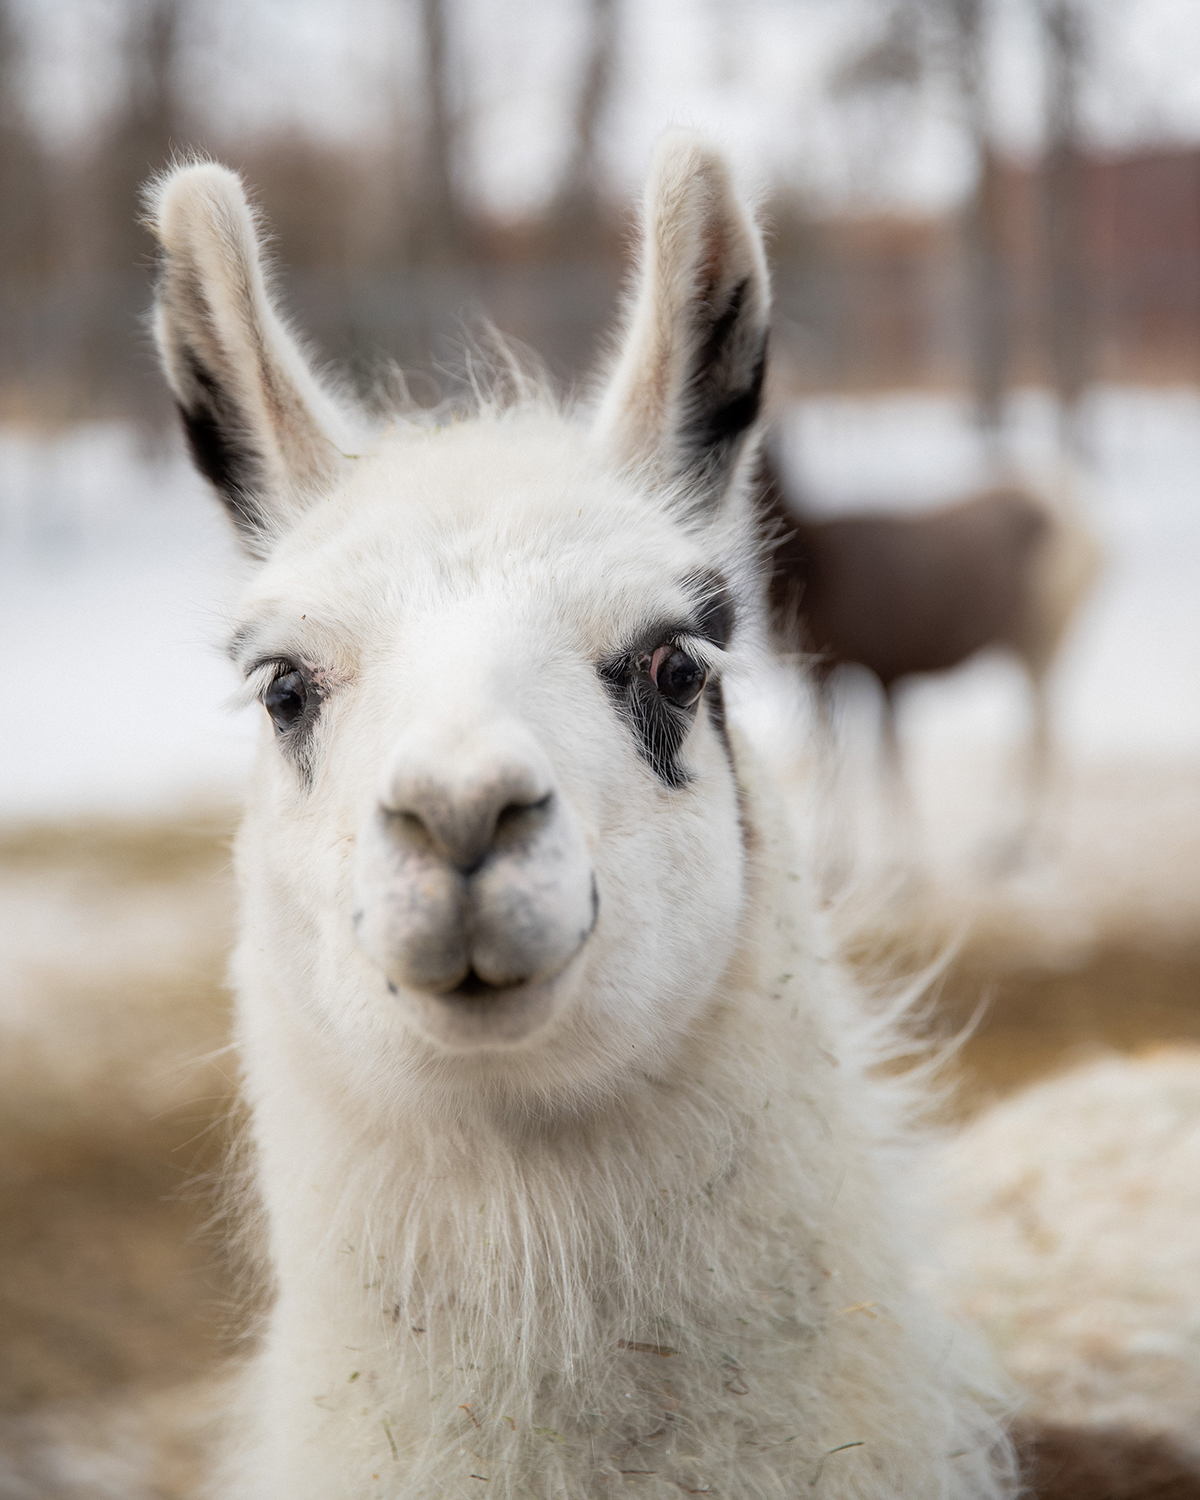 close-up picture of a young, white llama's face